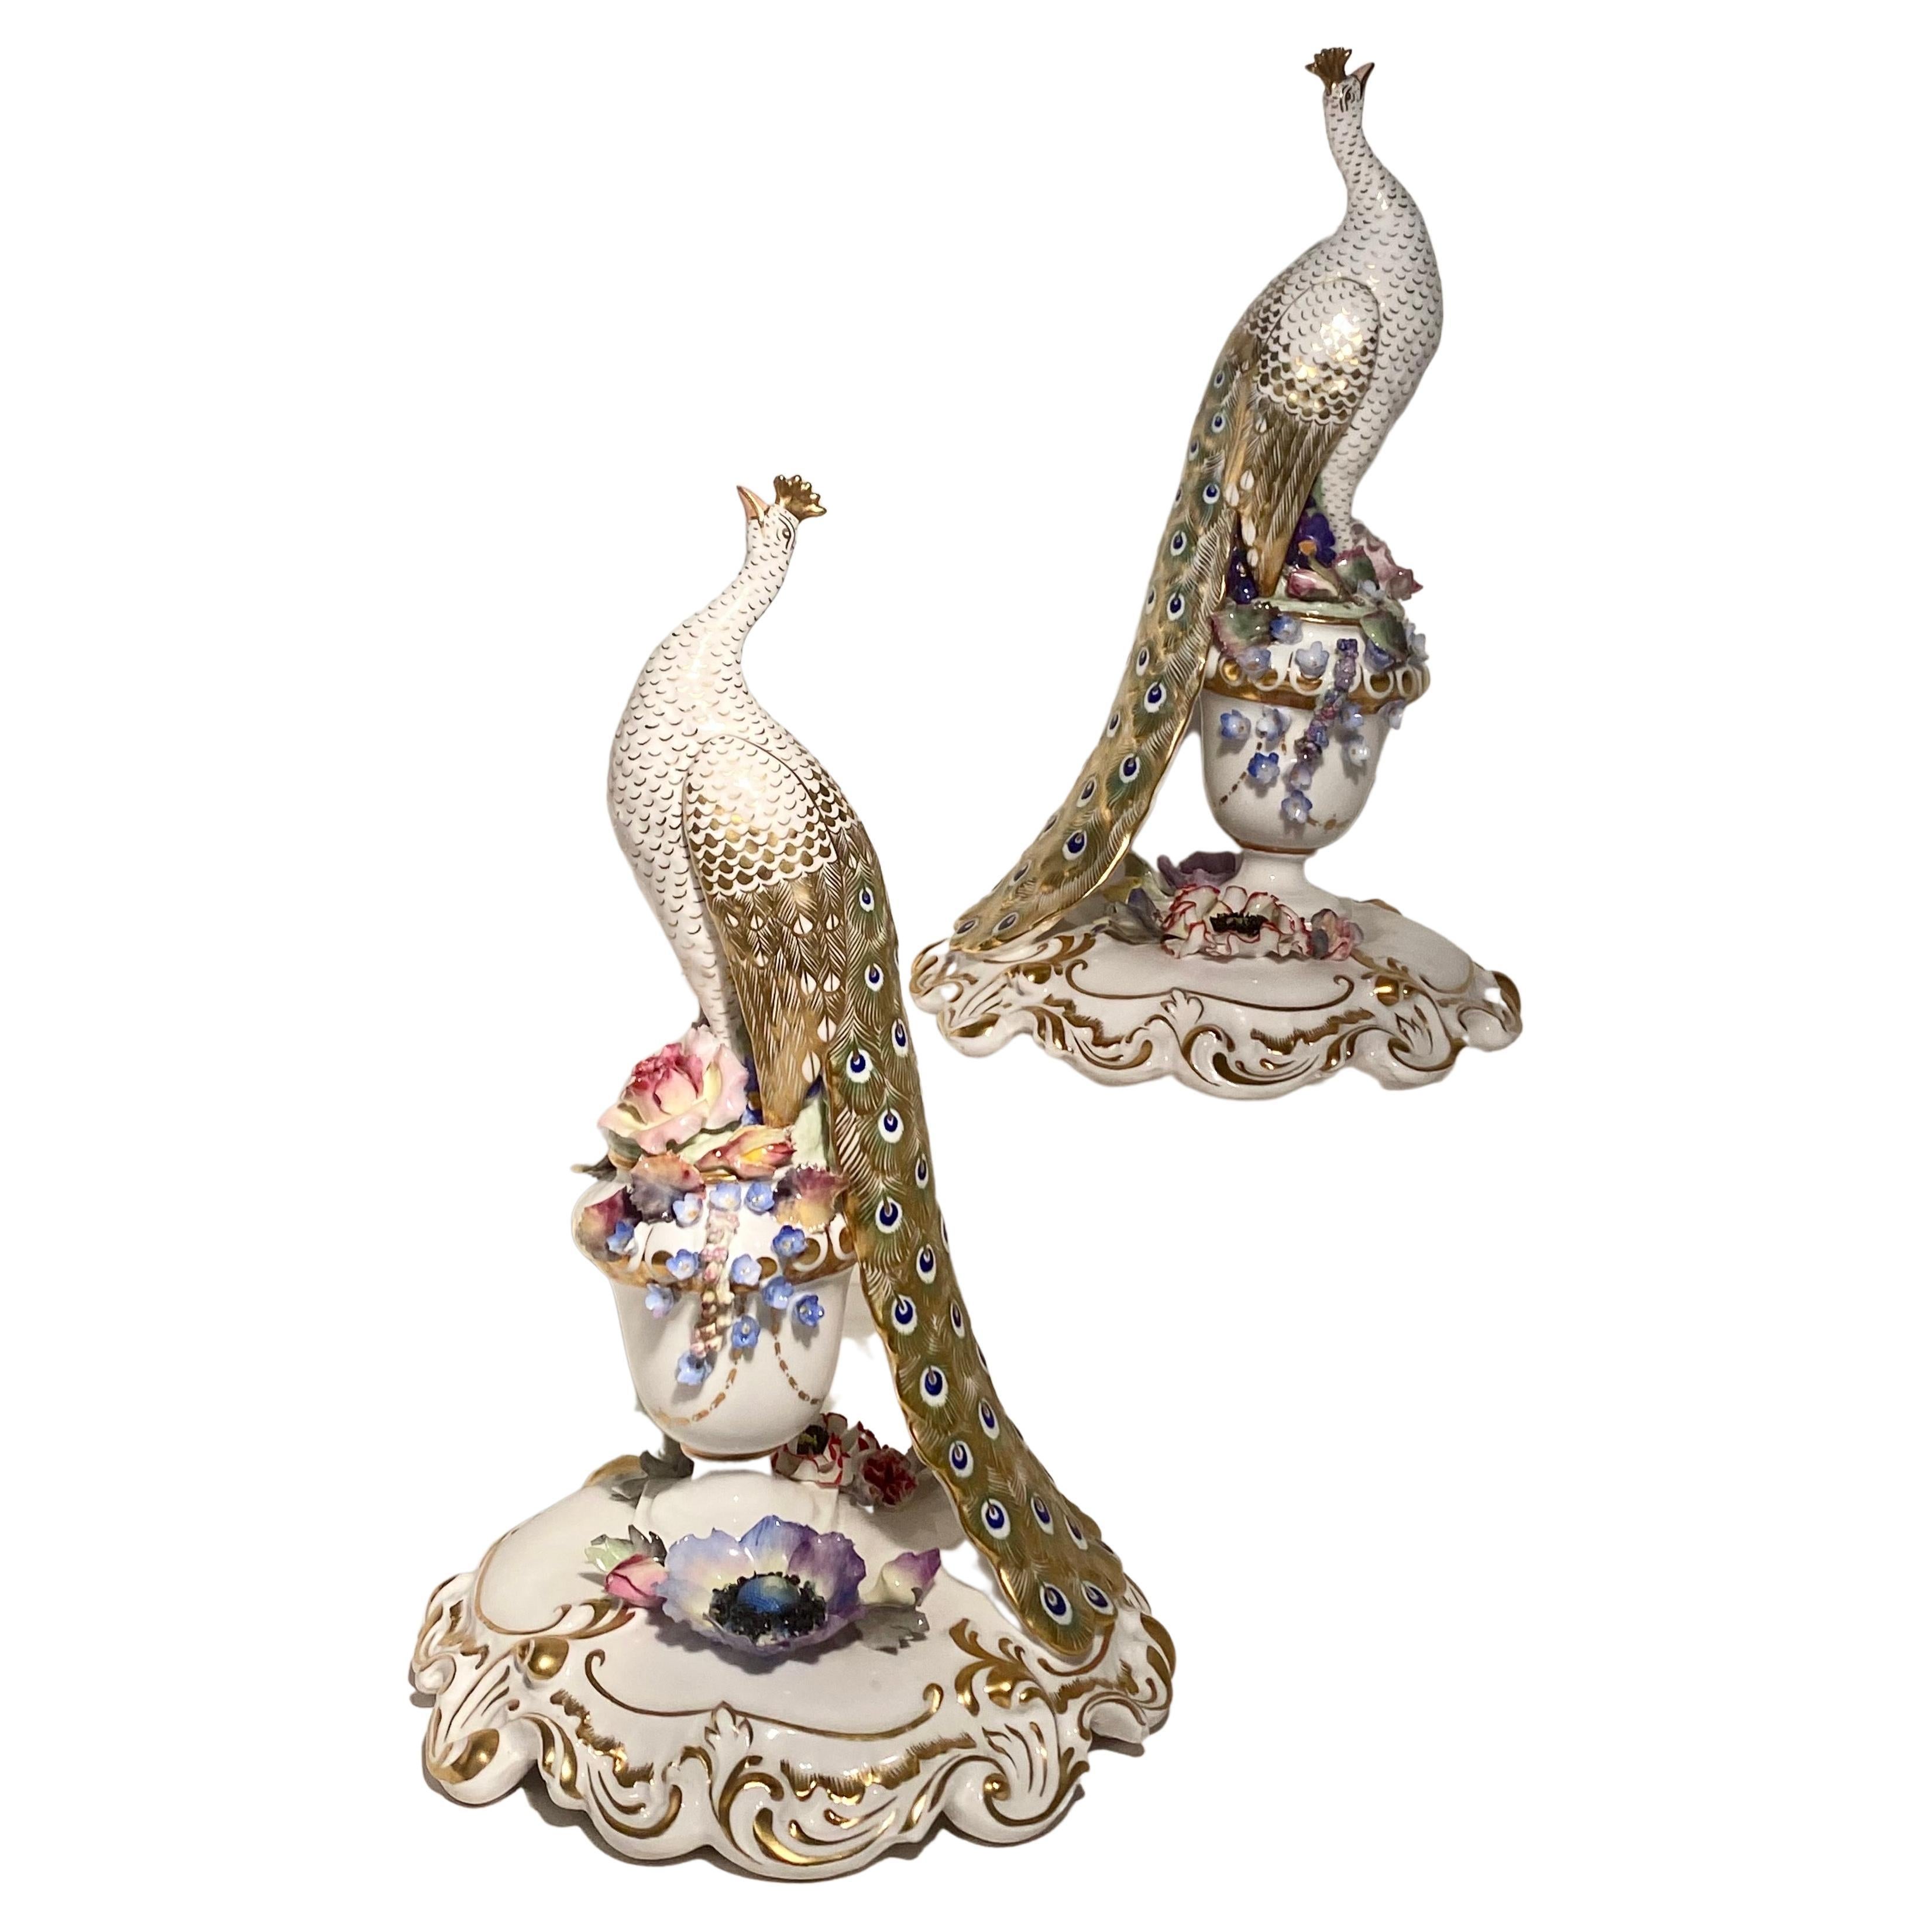 Royal Crown Derby Porcelain Figure, Modelled as a Peacock For Sale 1